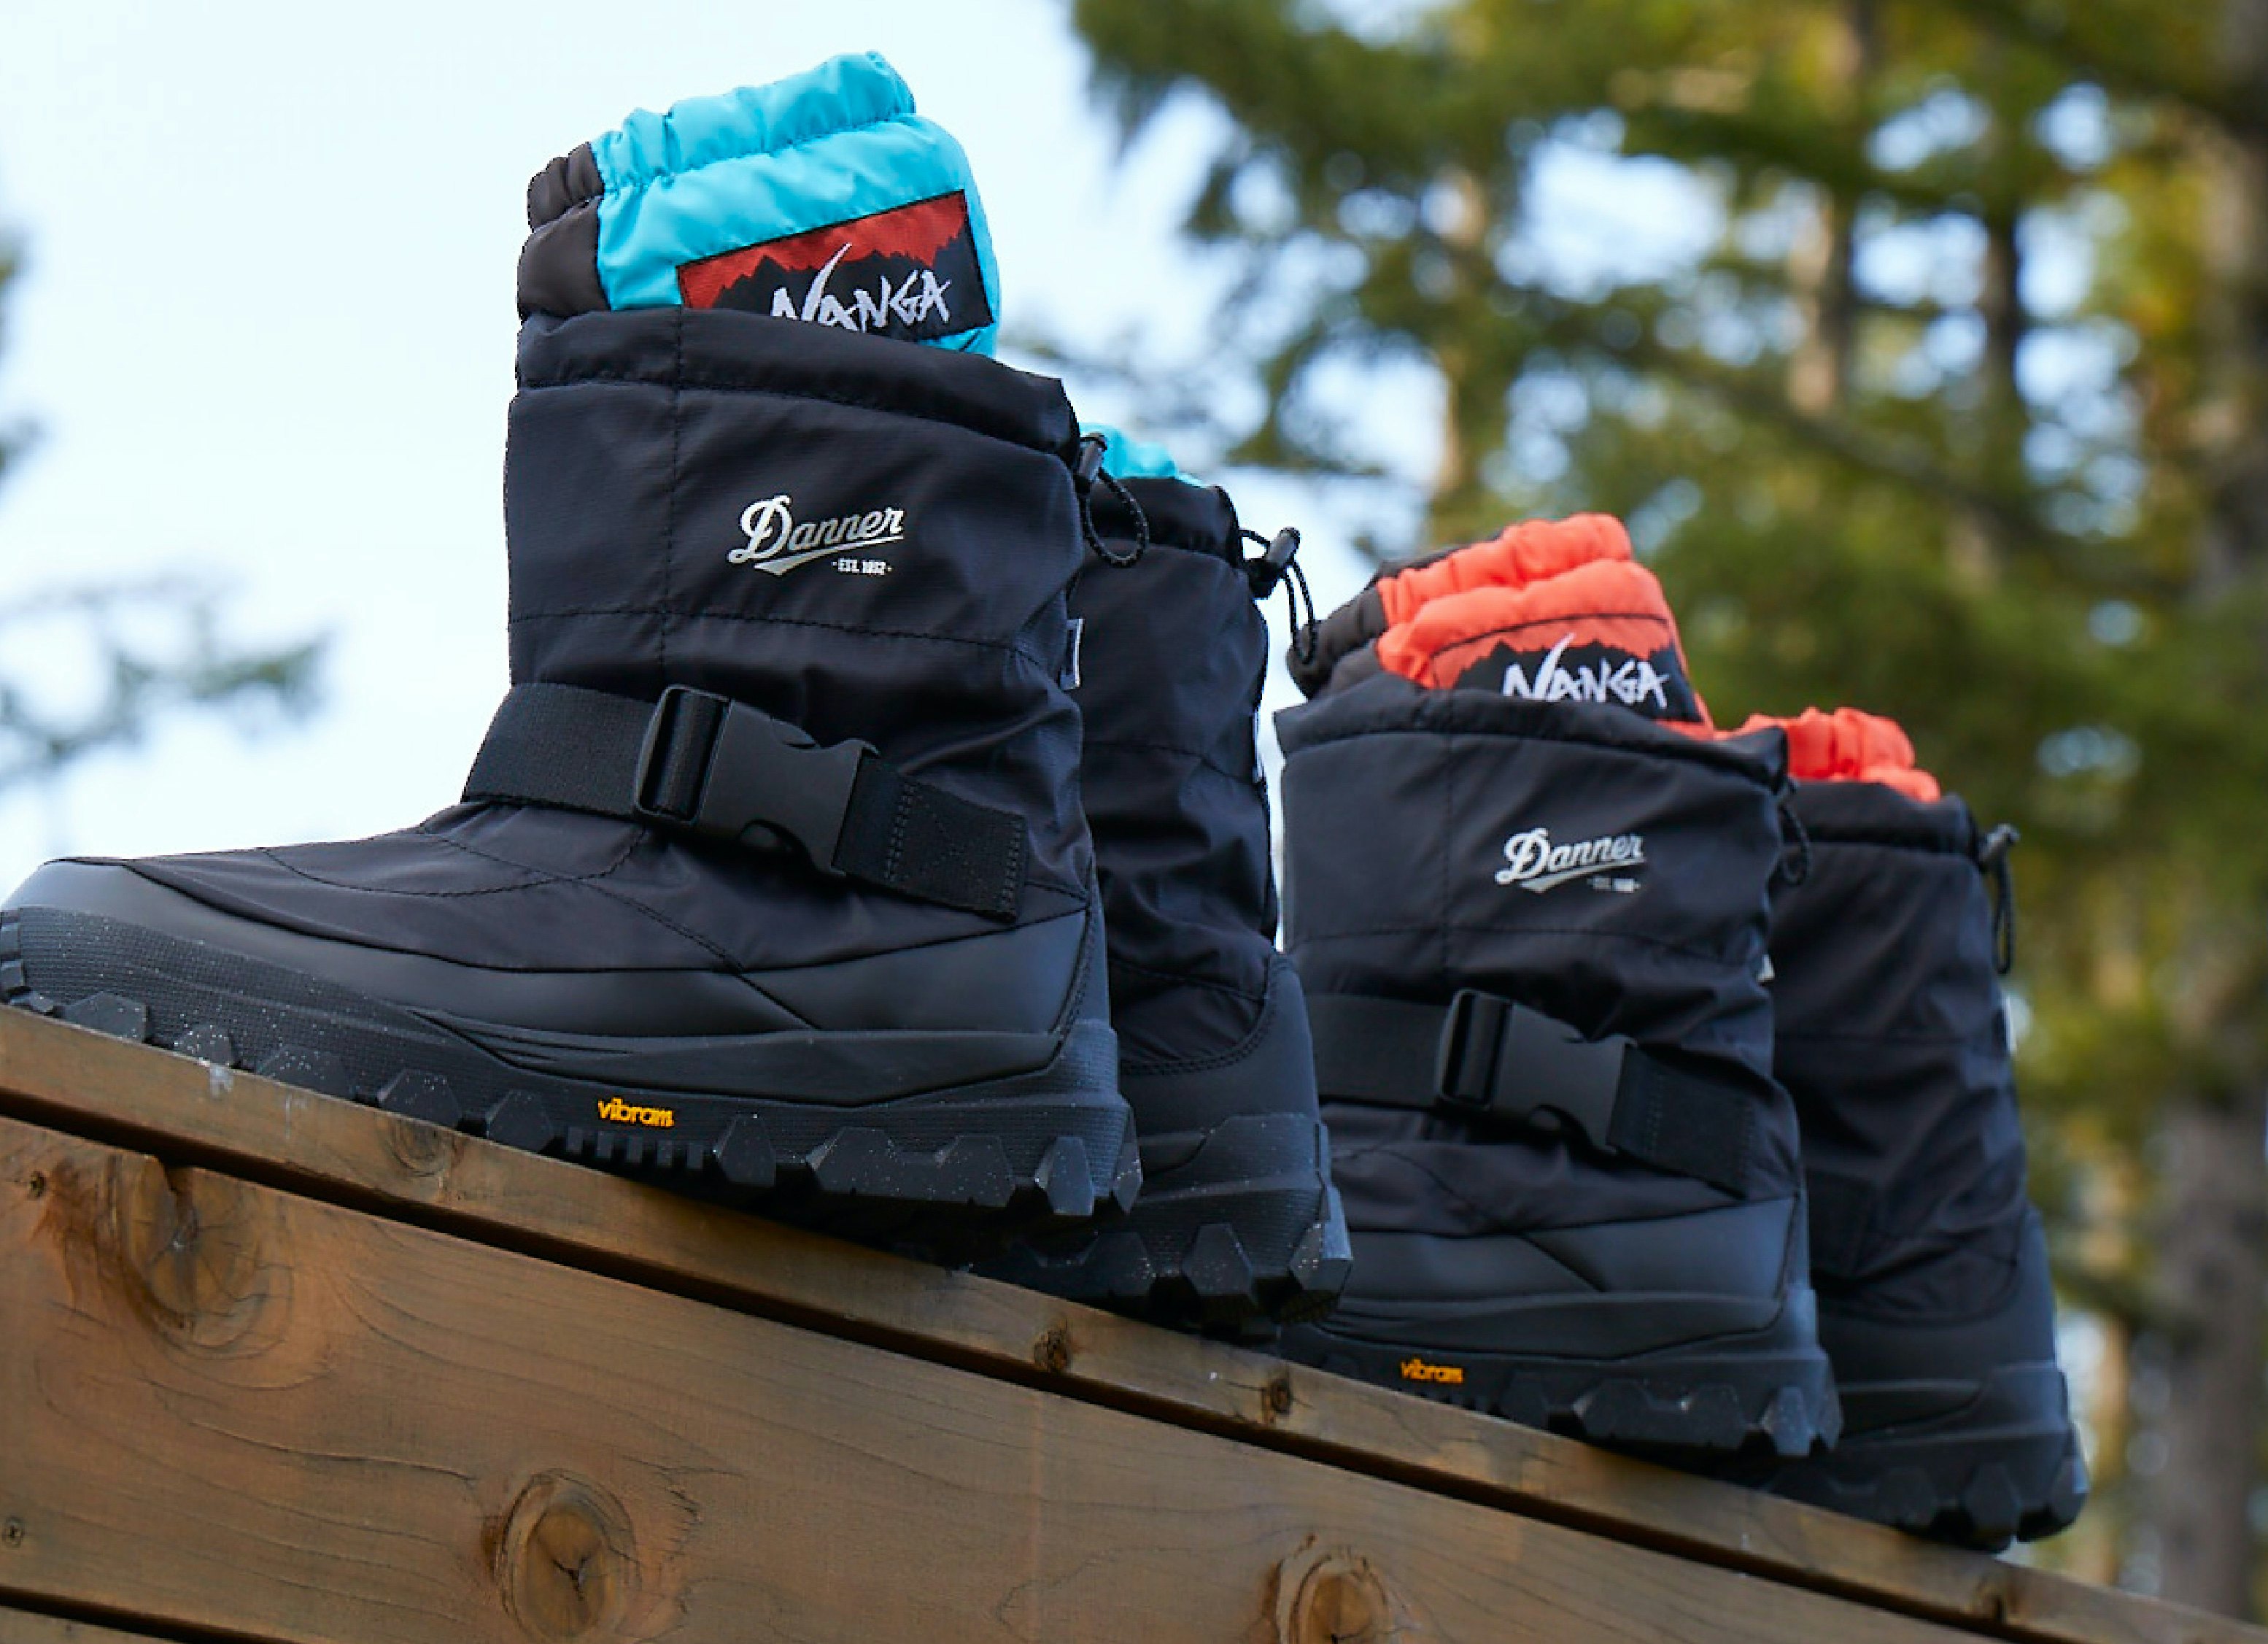 These down-stuff boots are like modular sleeping bags for your feet